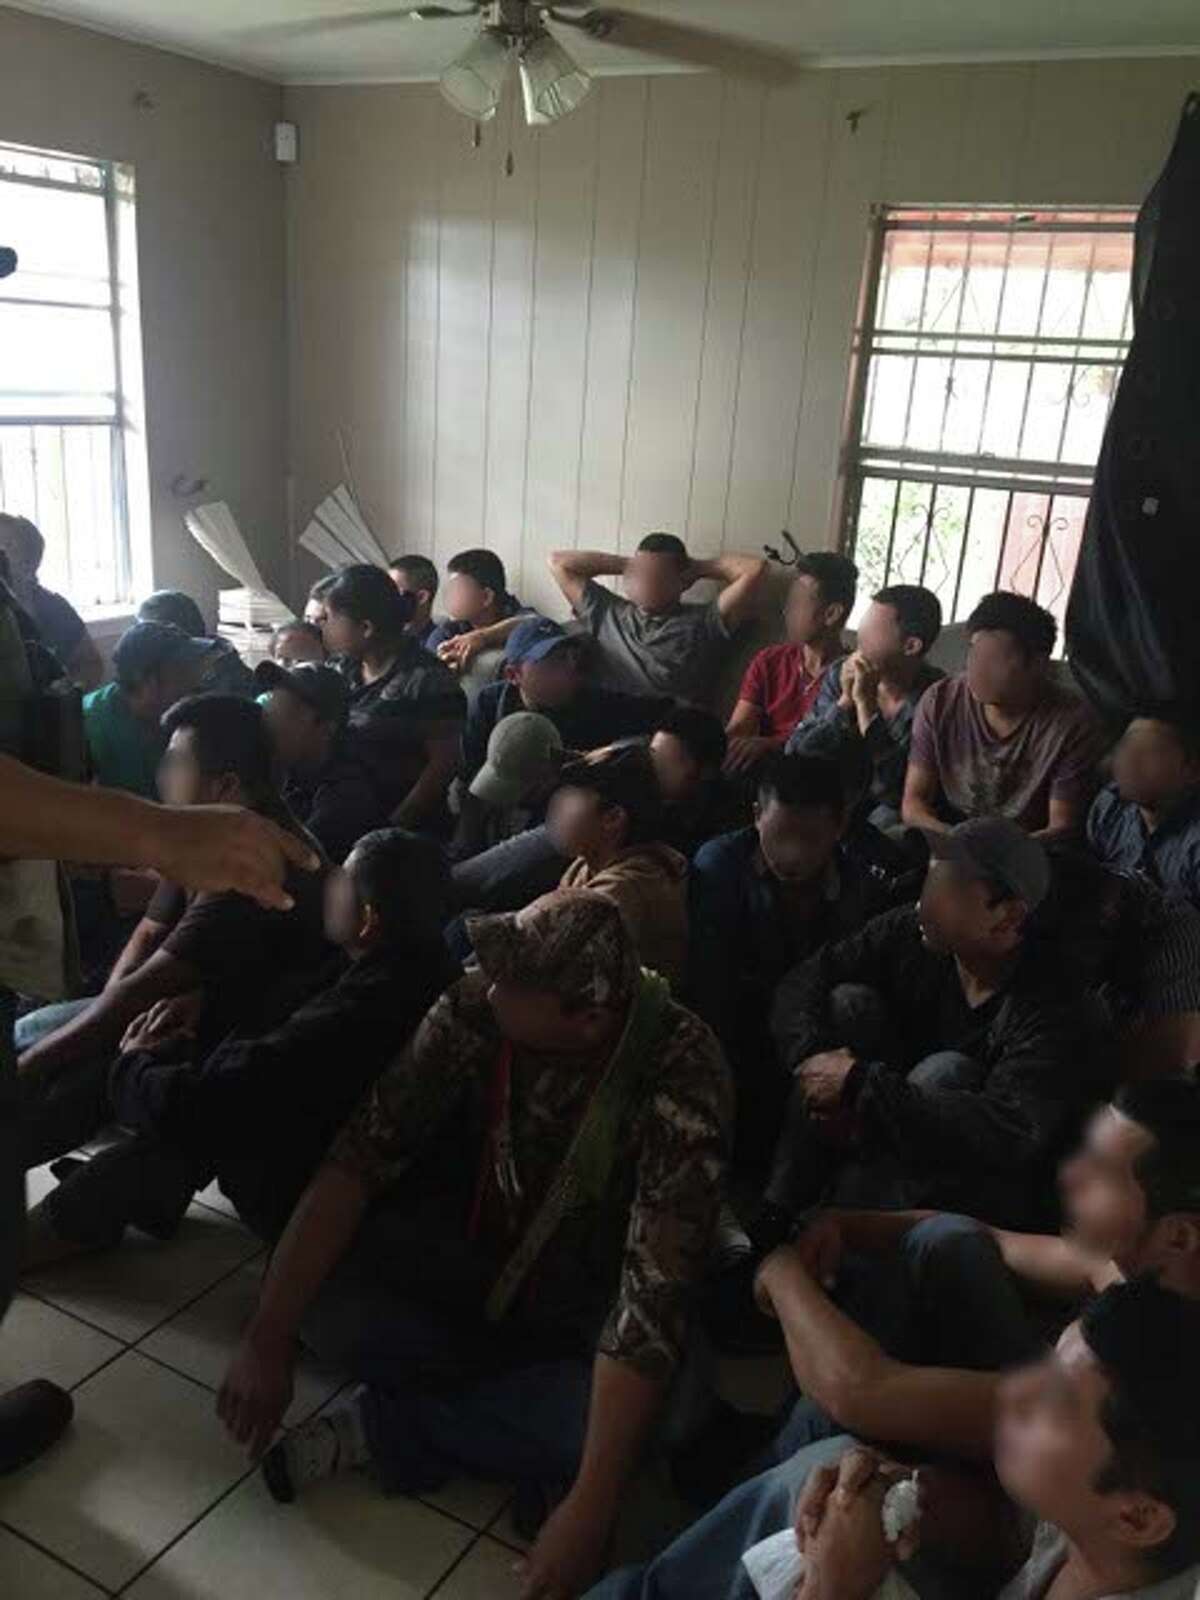 Border Protection agents found 34 undocumented immigrants living inside a home in San Juan. Two smugglers were arrested during the find.